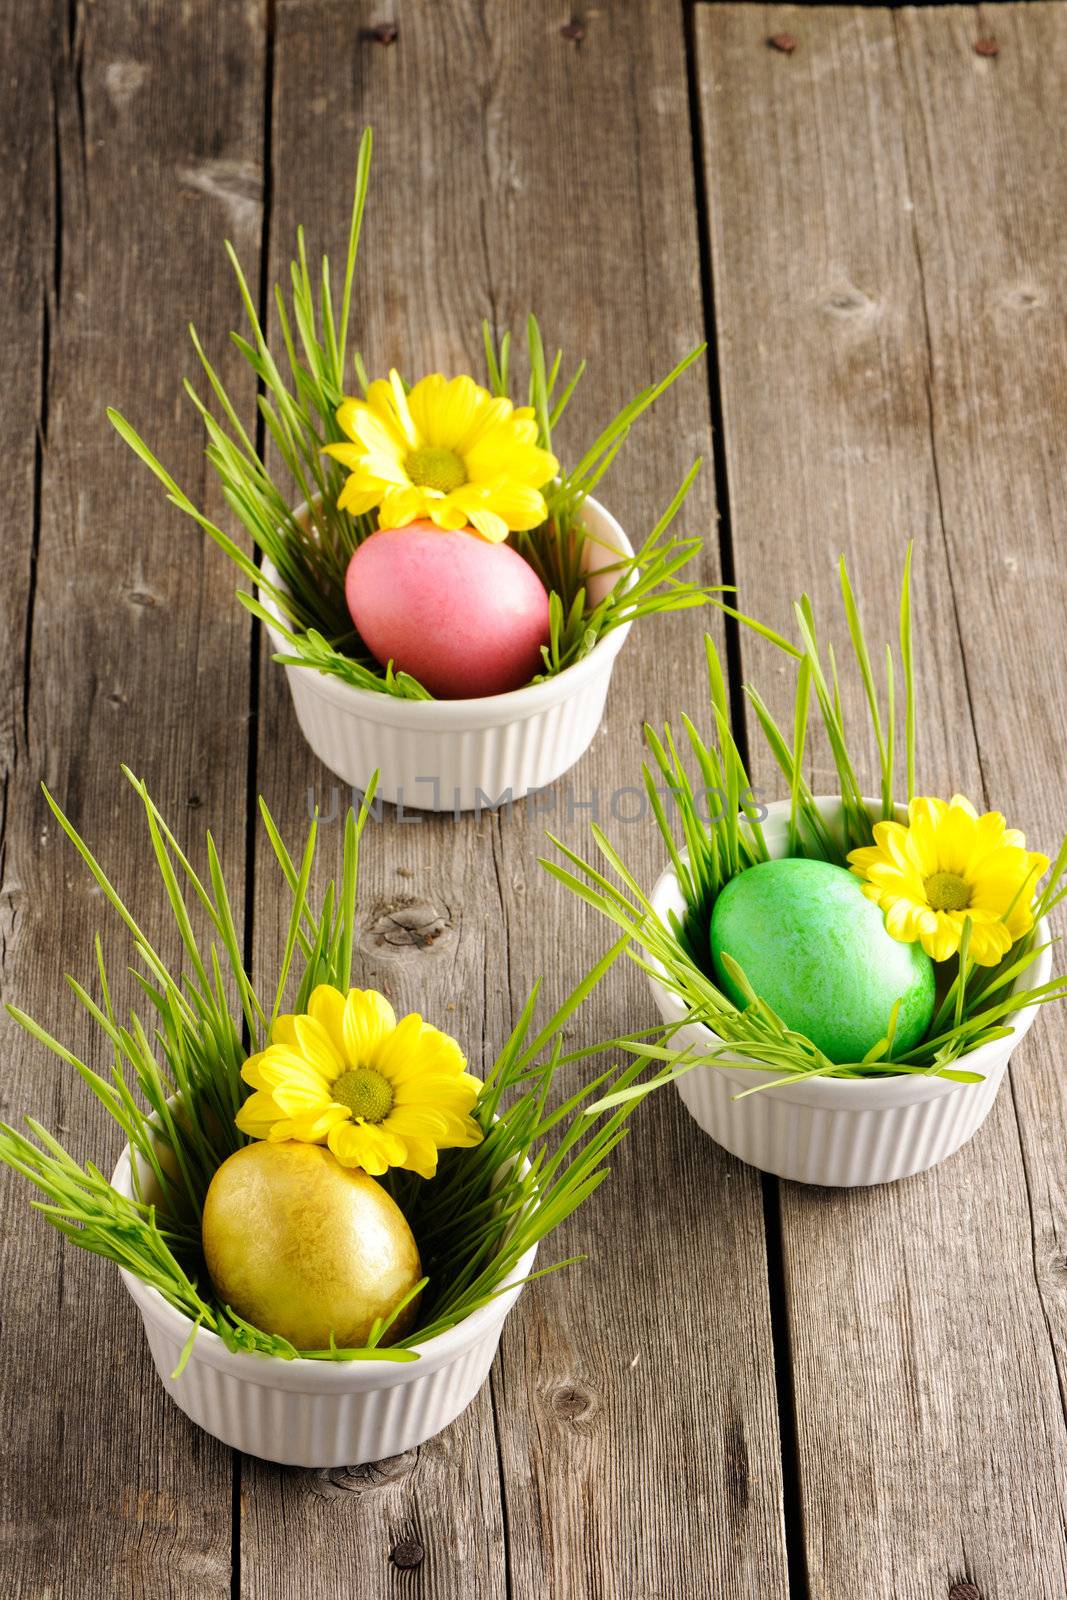 Colored easter eggs on wooden table